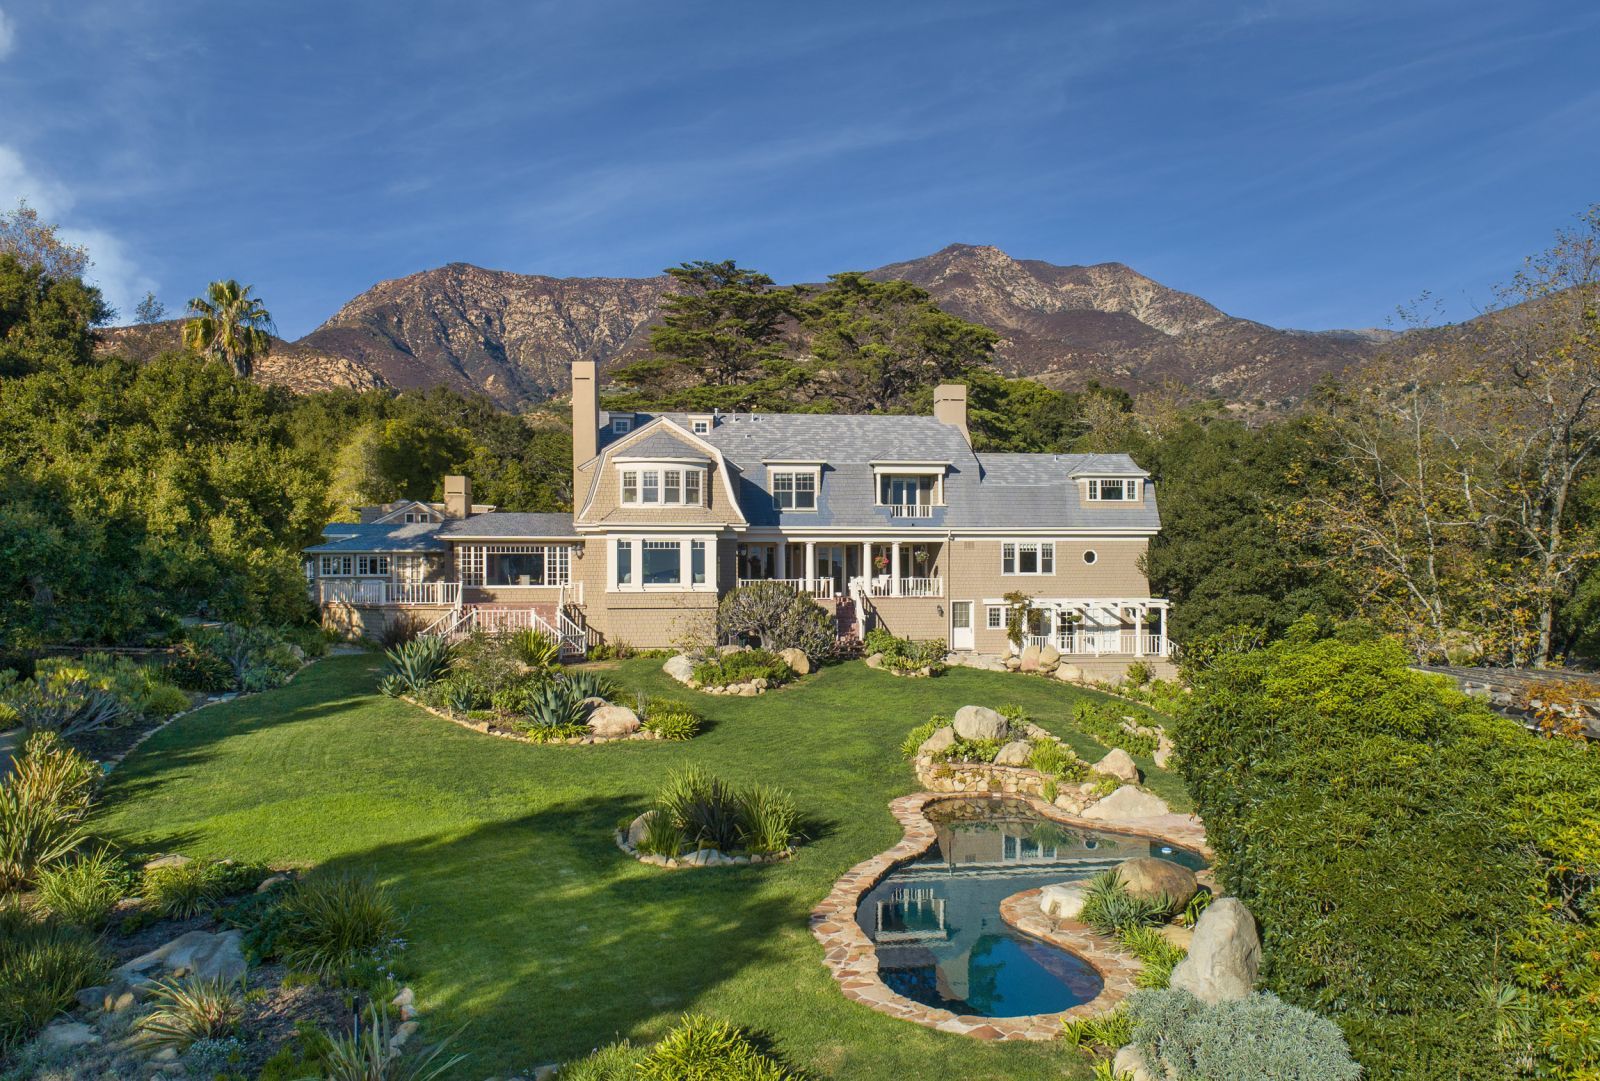 A classic Cape Cod style home with a pool in the foreground and mountains in the background.